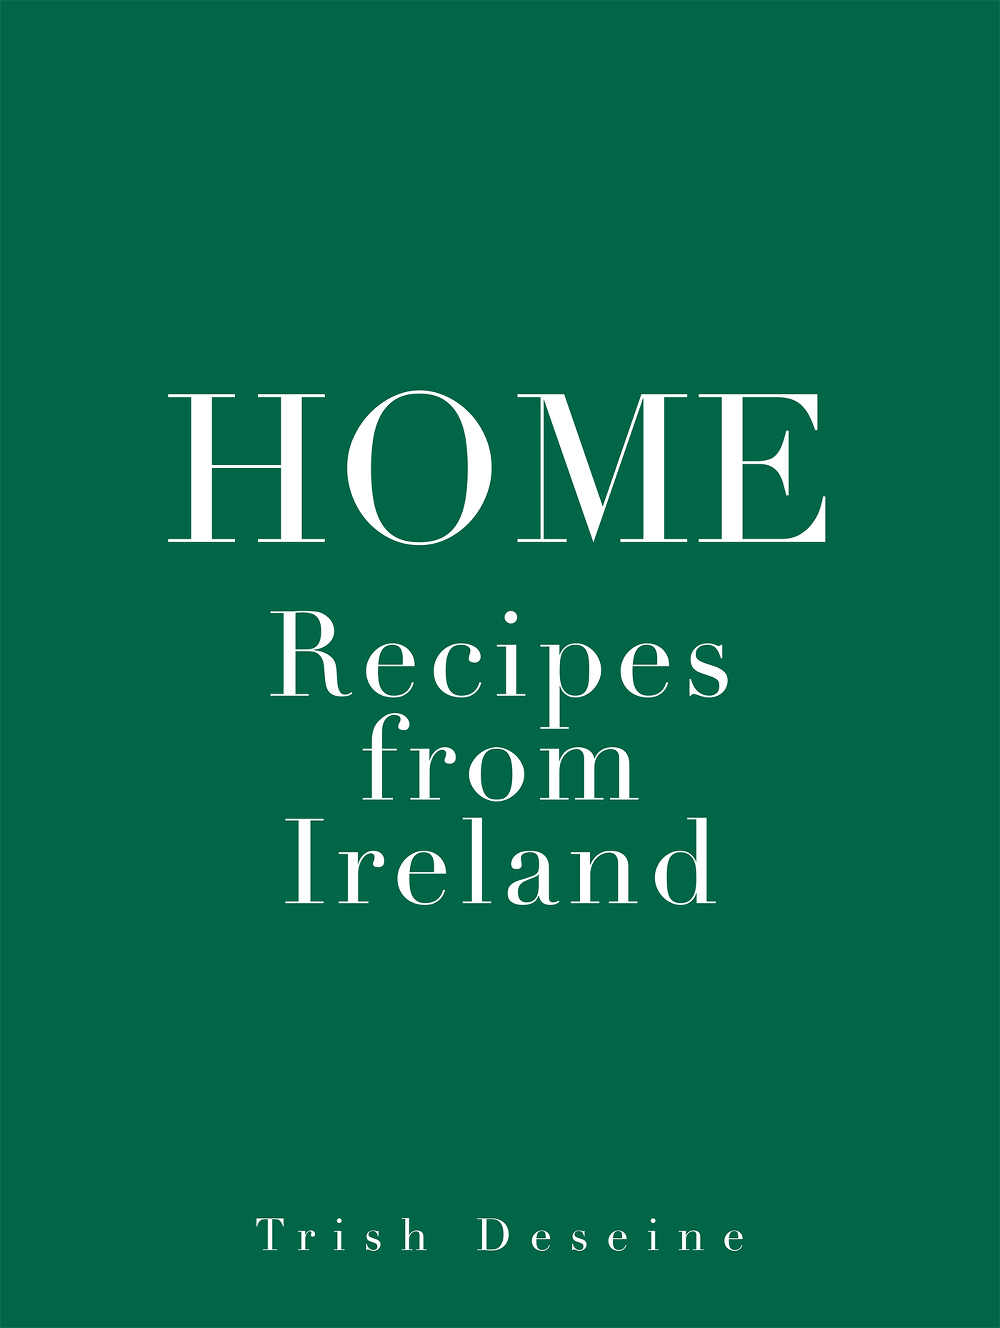 HOME: Recipes from Ireland by Trish Deseine (Hachette Cuisine; hardback, 356pp; photography by Deirdre Rooney; â‚¬29)